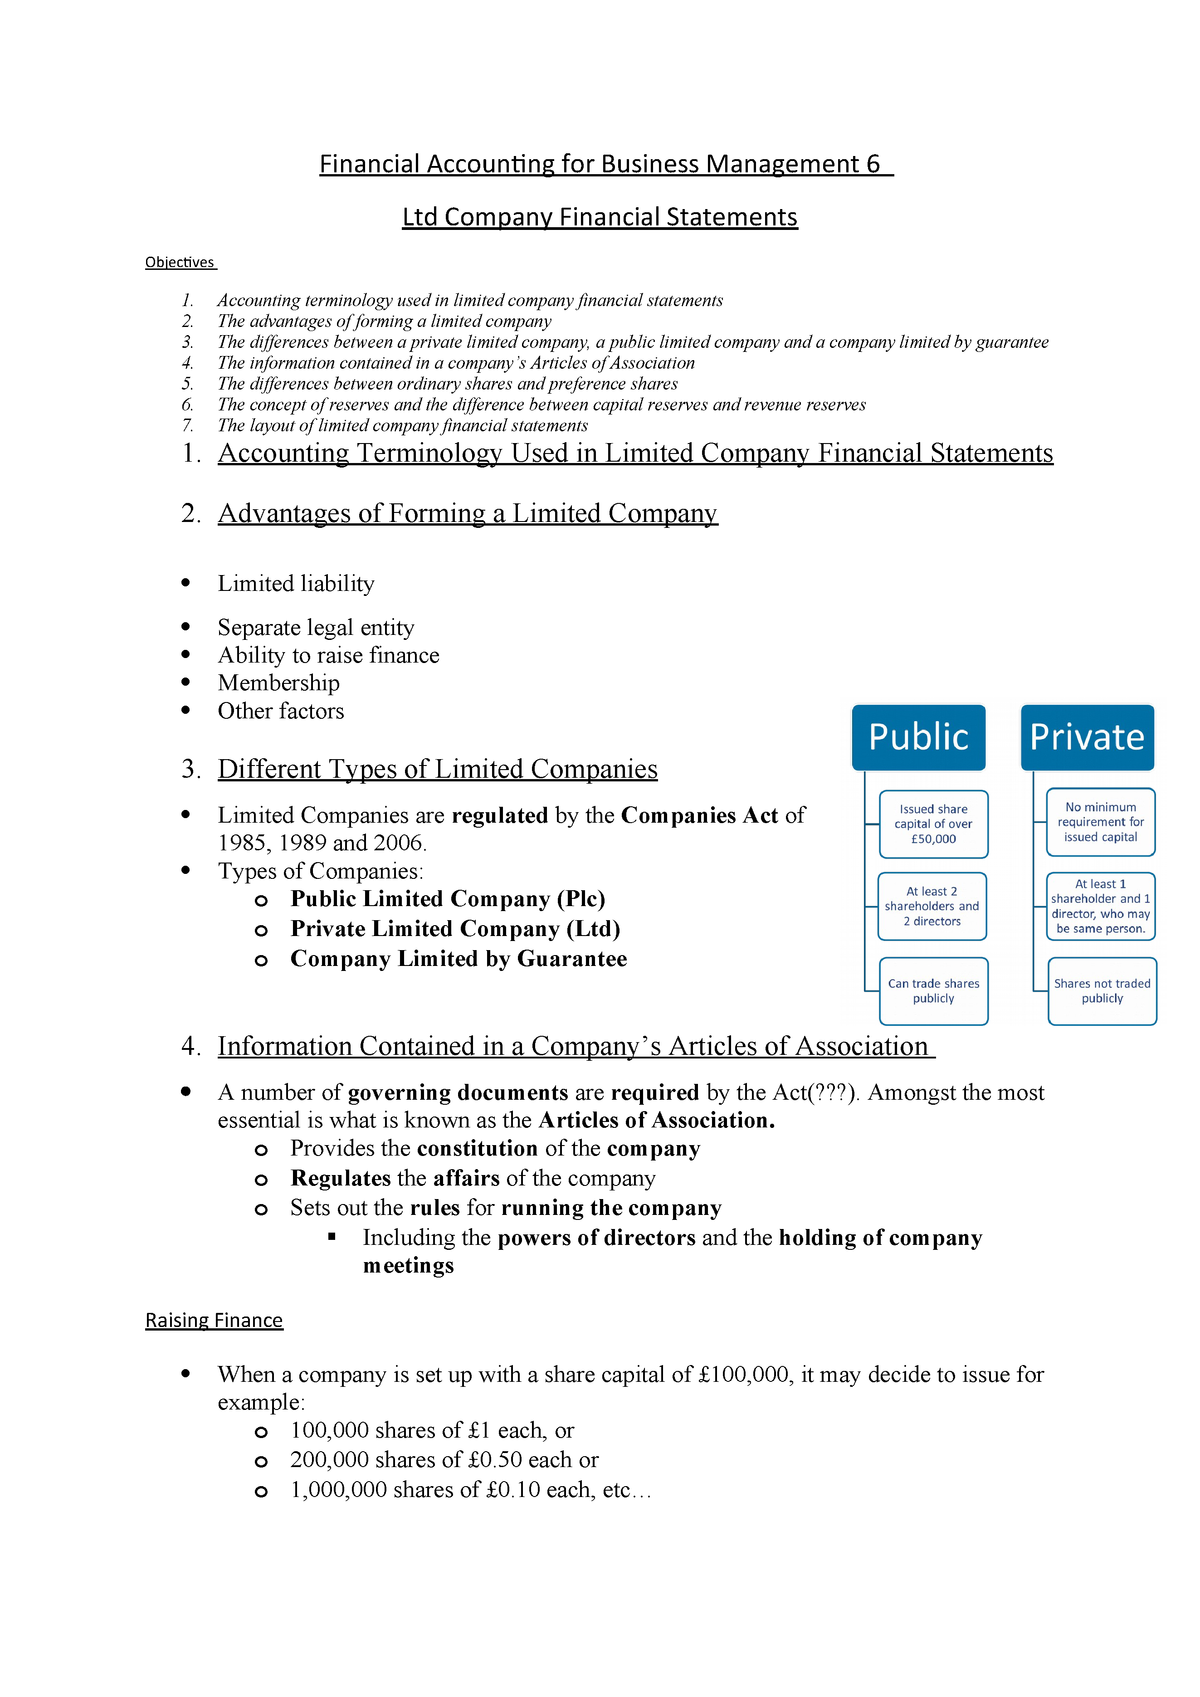 Financial Accounting For Business Management 7 Ltd Company Financial Statements Financial Accounting For Business Management Ltd Company Financial Statements Studocu